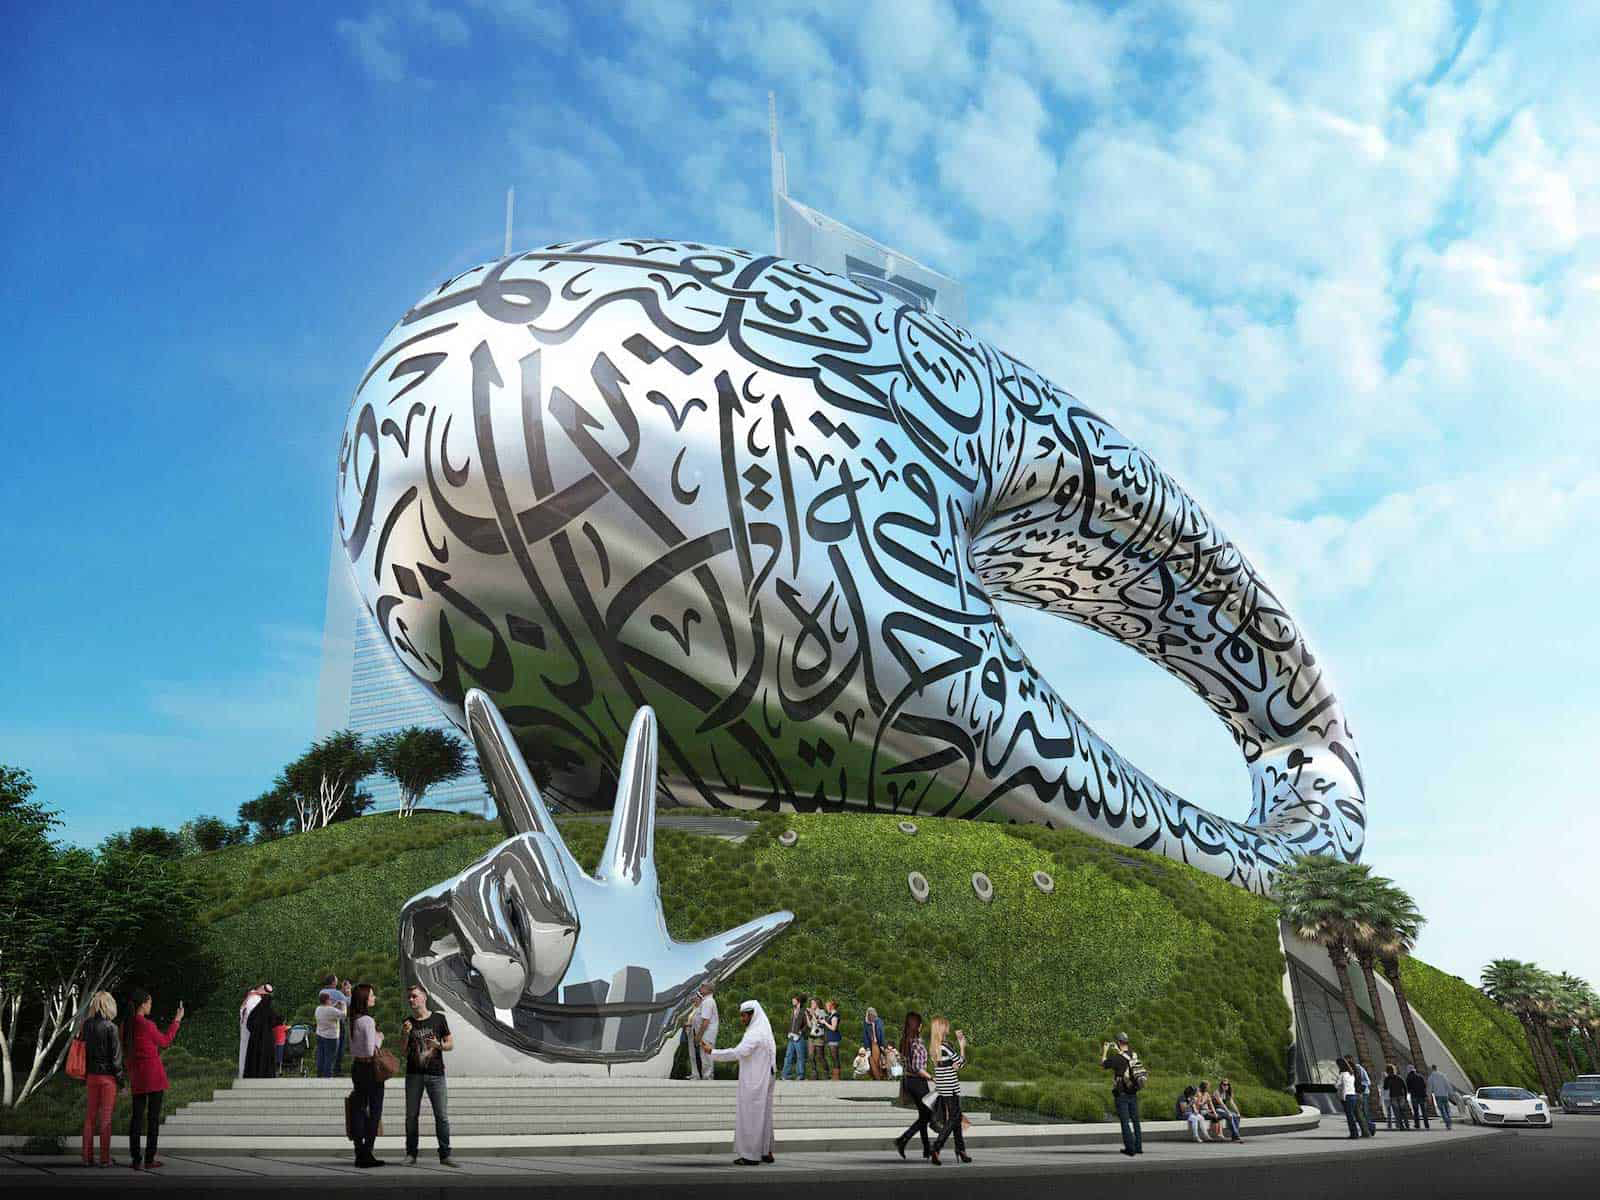 UAE Travel Guide for First Time Visitors - Museum Of The Future, Dubai